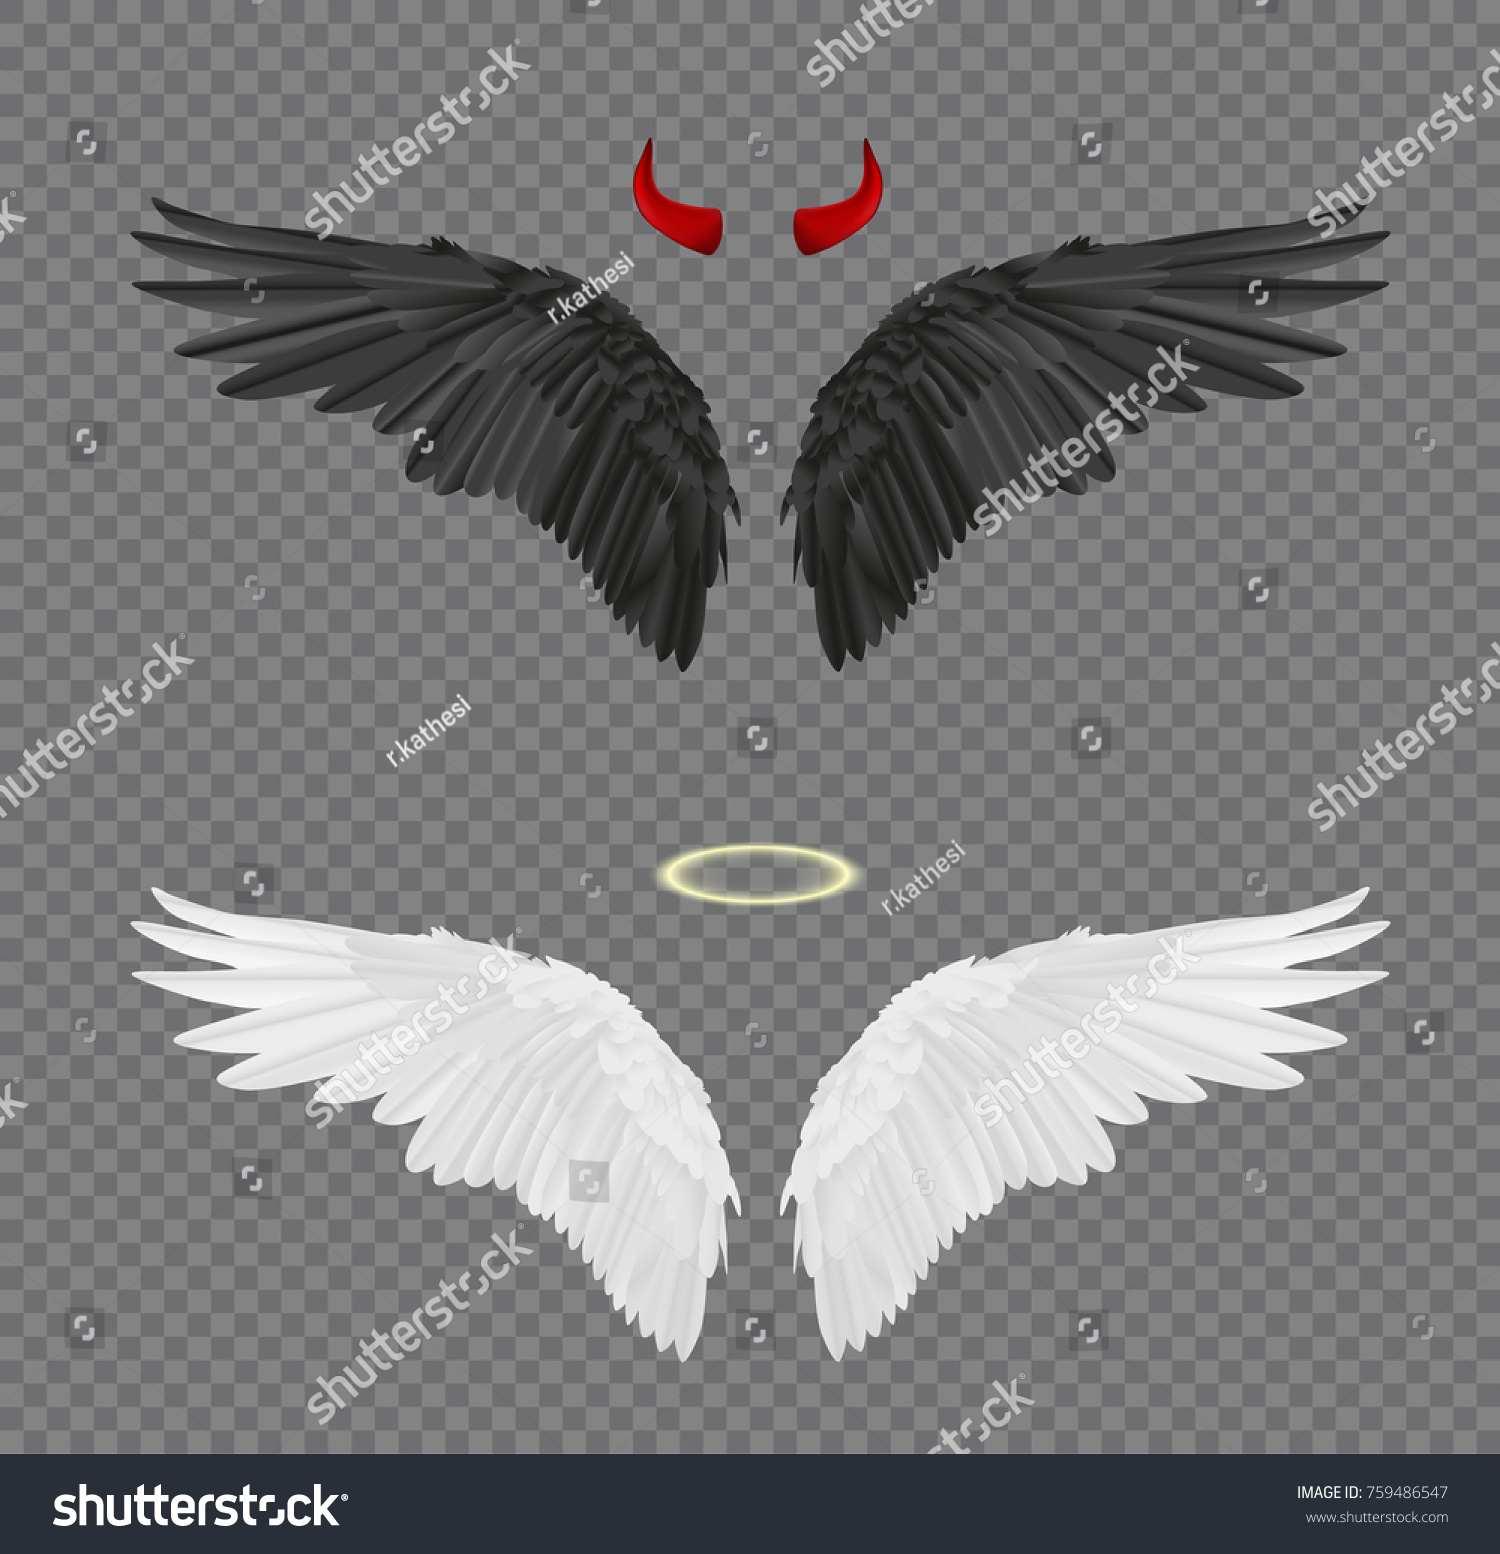 SVG of Set of angel and devil realistic wings, horns and halo isolated on transparent background svg